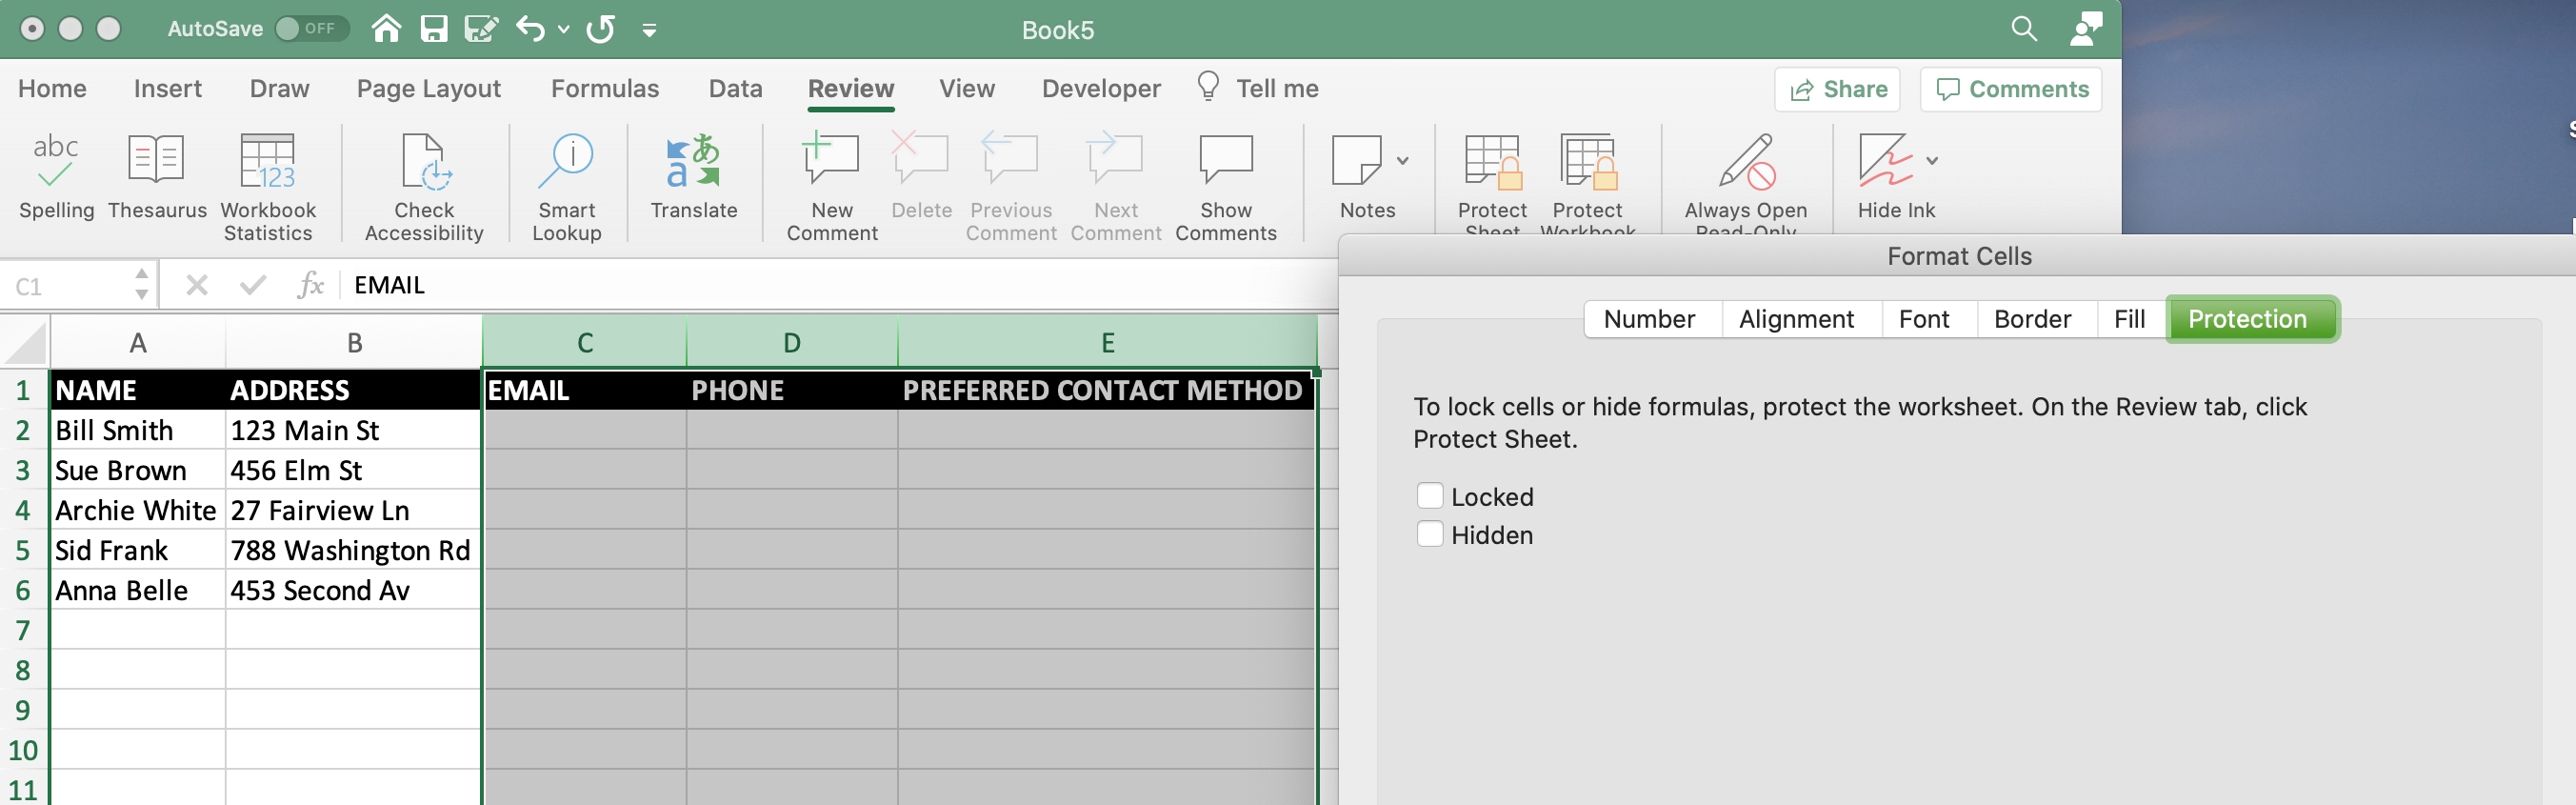 excel for mac align right